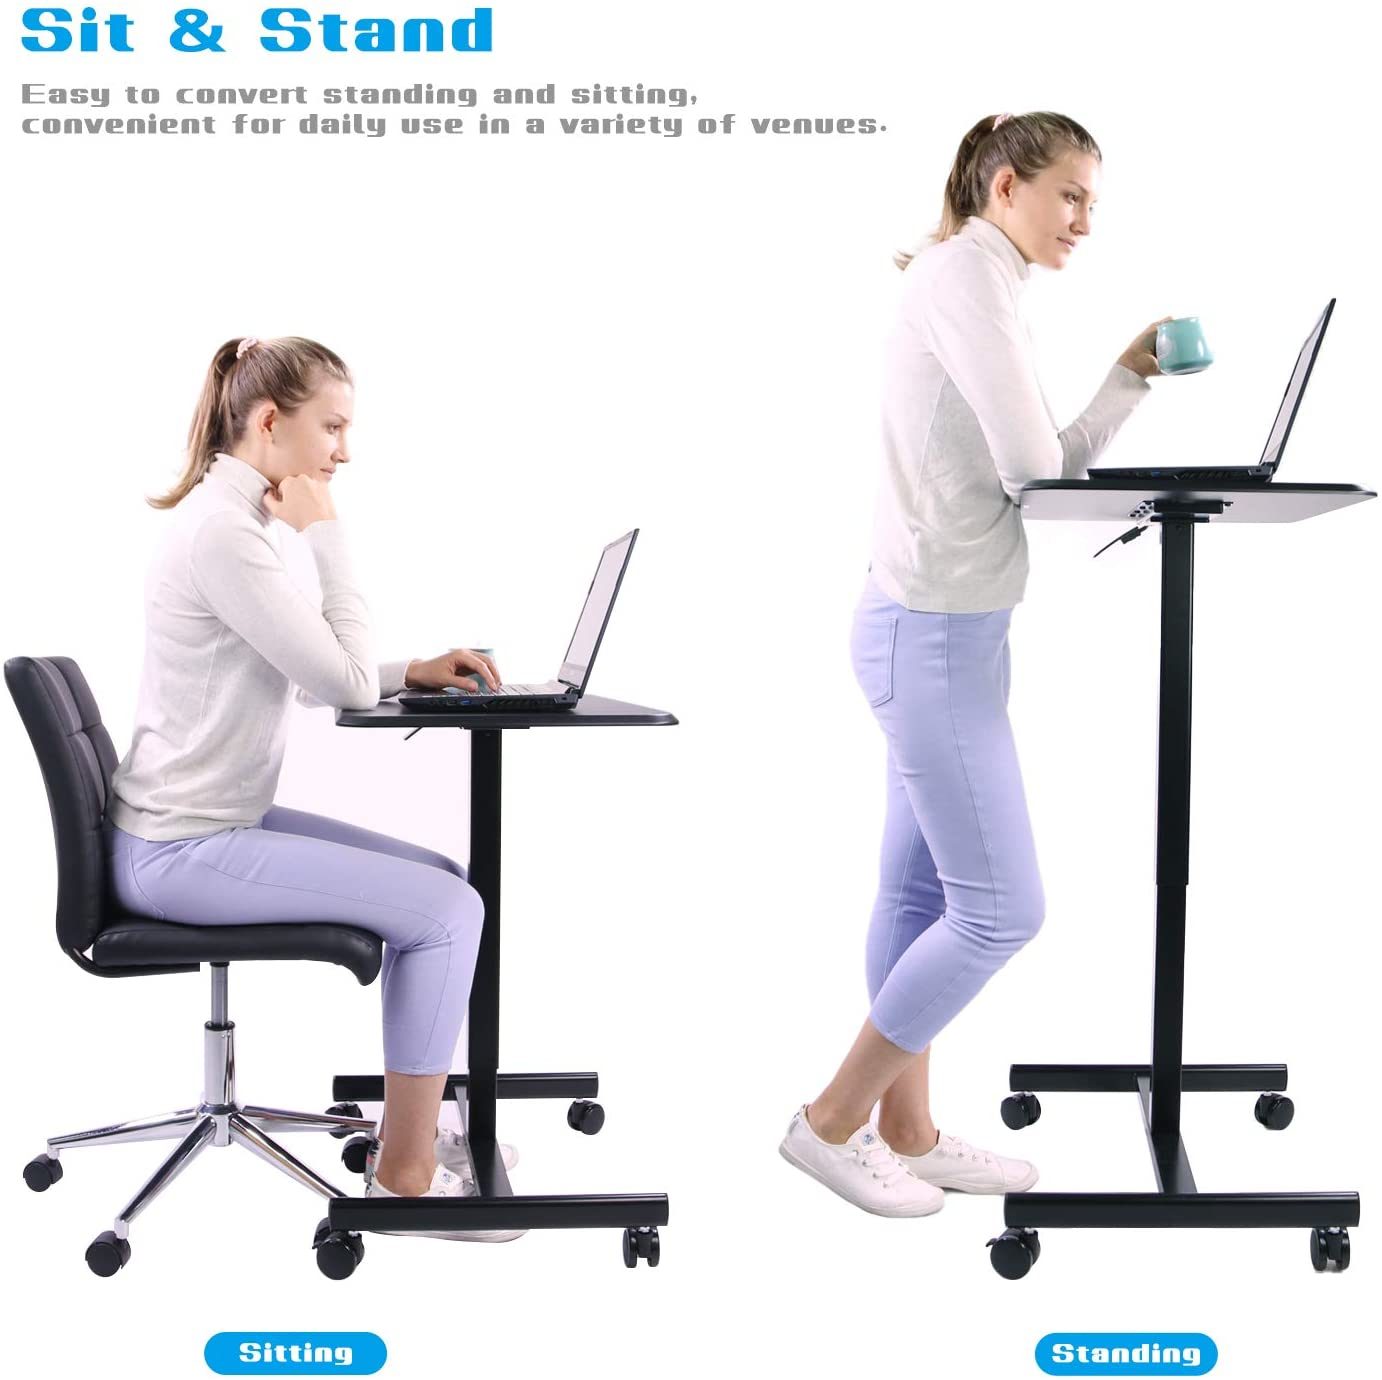 Mobile Sit-Stand Desk Adjustable Height Laptop Desk Cart Ergonomic Table Small Standing Desk with Pneumatic Height Adjustments, Black,White